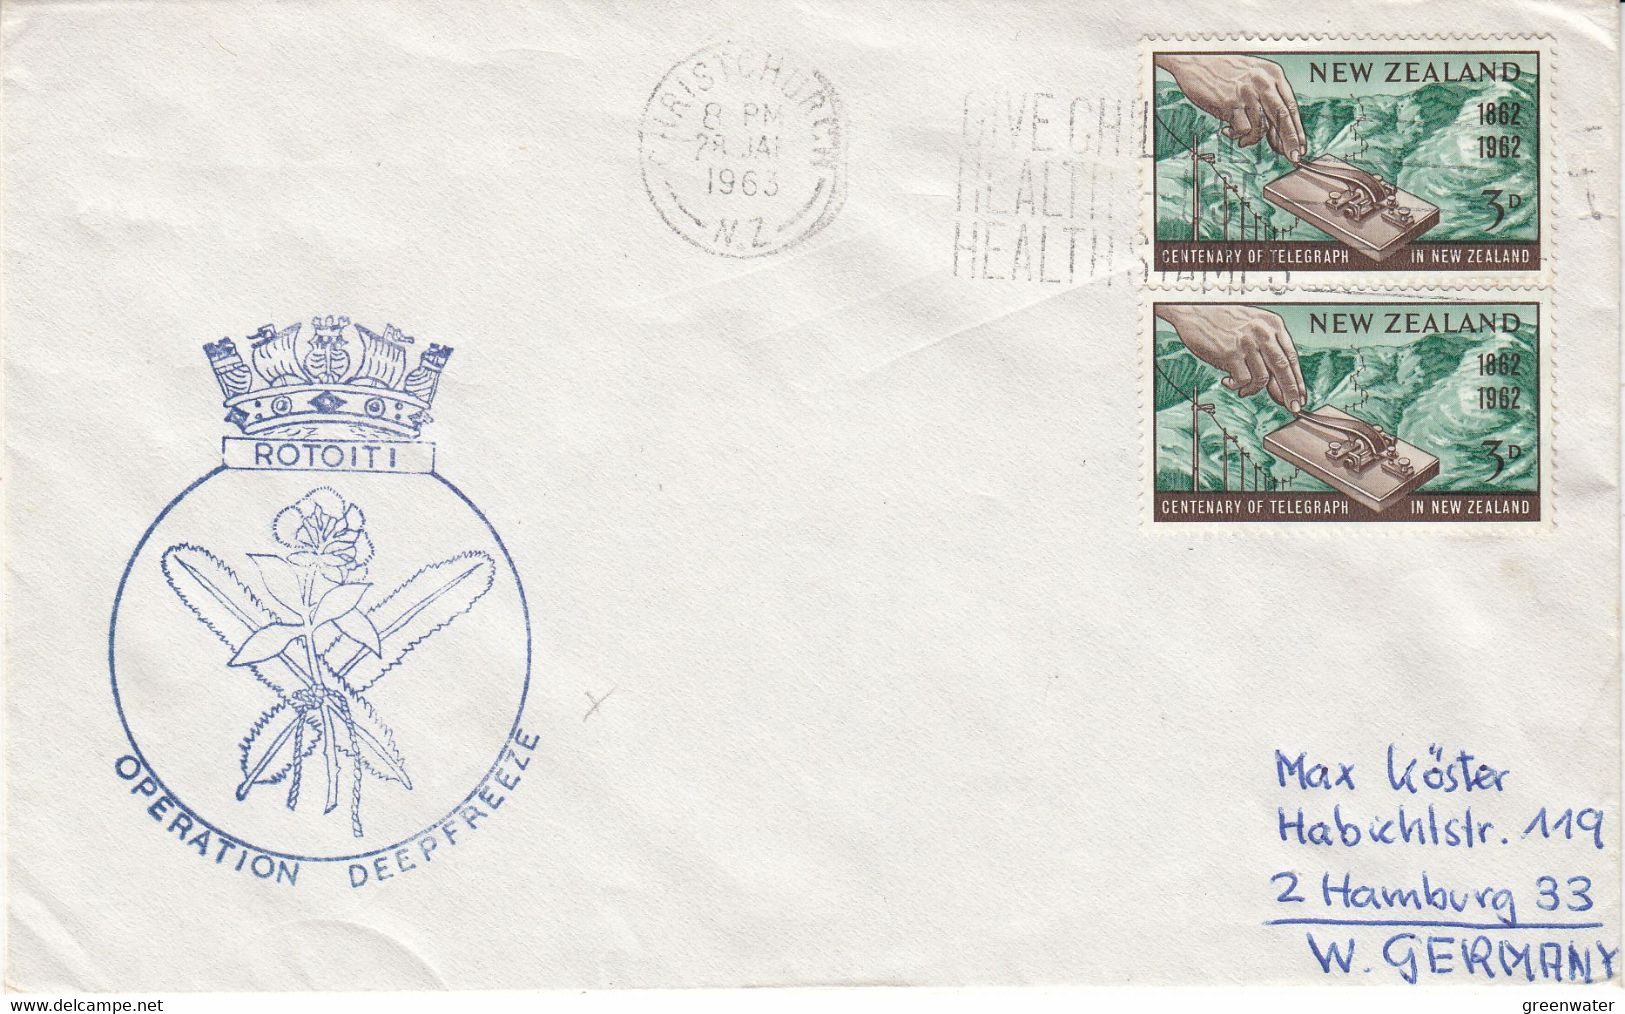 New Zealand 1963 Cover Operation Deepfree Ca Christchurch 28 JAN 1963 (52366) - Covers & Documents